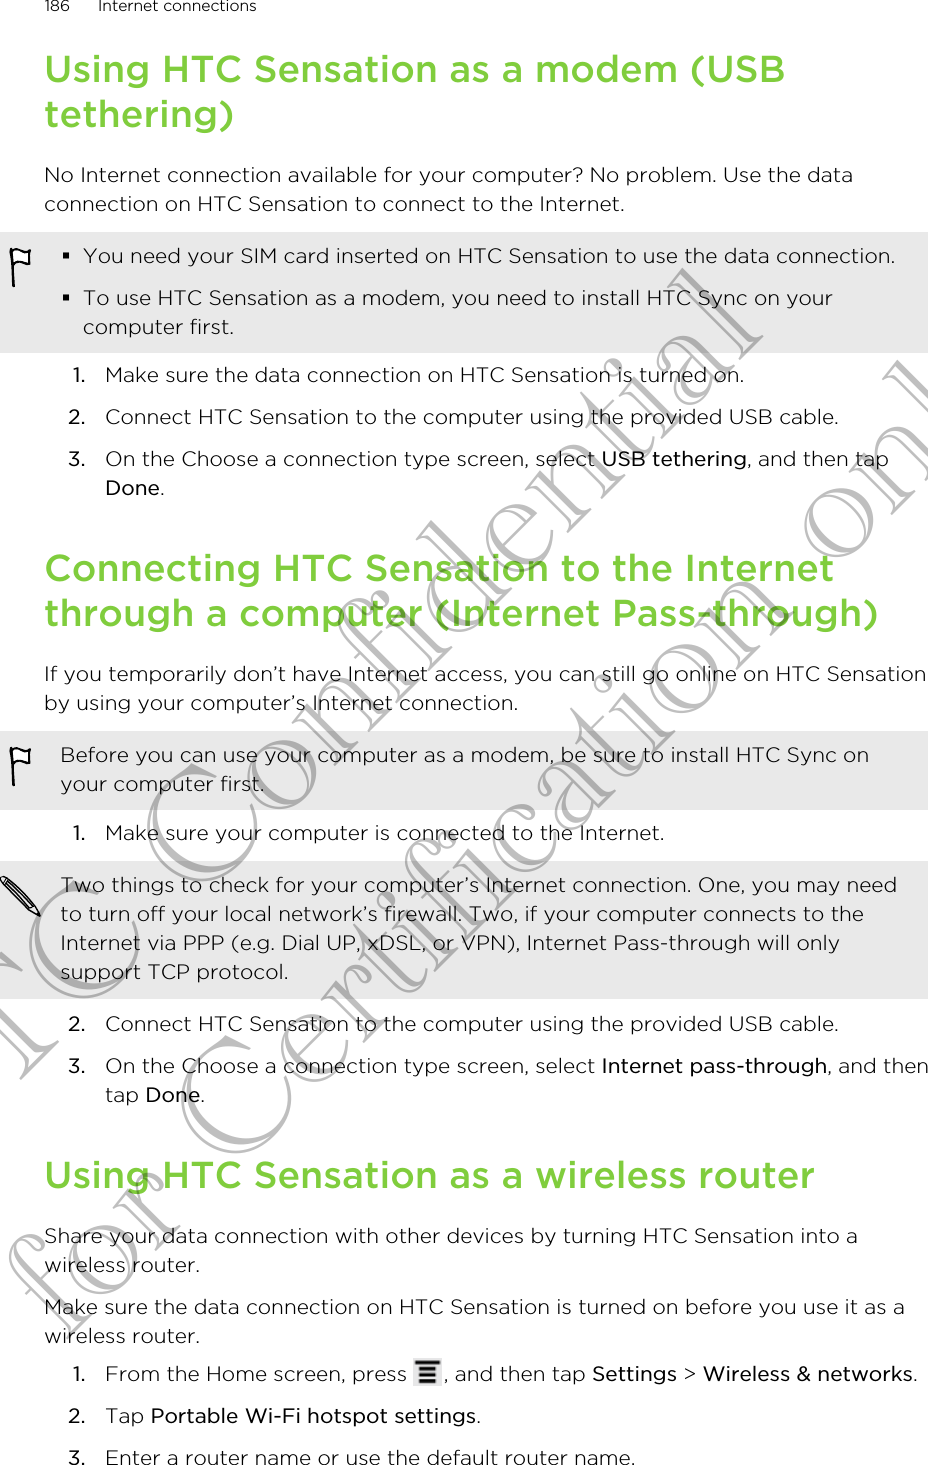 Using HTC Sensation as a modem (USBtethering)No Internet connection available for your computer? No problem. Use the dataconnection on HTC Sensation to connect to the Internet.§You need your SIM card inserted on HTC Sensation to use the data connection.§To use HTC Sensation as a modem, you need to install HTC Sync on yourcomputer first.1. Make sure the data connection on HTC Sensation is turned on.2. Connect HTC Sensation to the computer using the provided USB cable.3. On the Choose a connection type screen, select USB tethering, and then tapDone.Connecting HTC Sensation to the Internetthrough a computer (Internet Pass-through)If you temporarily don’t have Internet access, you can still go online on HTC Sensationby using your computer’s Internet connection.Before you can use your computer as a modem, be sure to install HTC Sync onyour computer first.1. Make sure your computer is connected to the Internet. Two things to check for your computer’s Internet connection. One, you may needto turn off your local network’s firewall. Two, if your computer connects to theInternet via PPP (e.g. Dial UP, xDSL, or VPN), Internet Pass-through will onlysupport TCP protocol.2. Connect HTC Sensation to the computer using the provided USB cable.3. On the Choose a connection type screen, select Internet pass-through, and thentap Done.Using HTC Sensation as a wireless routerShare your data connection with other devices by turning HTC Sensation into awireless router.Make sure the data connection on HTC Sensation is turned on before you use it as awireless router.1. From the Home screen, press  , and then tap Settings &gt; Wireless &amp; networks.2. Tap Portable Wi-Fi hotspot settings.3. Enter a router name or use the default router name.186 Internet connectionsHTC Confidential for Certification only